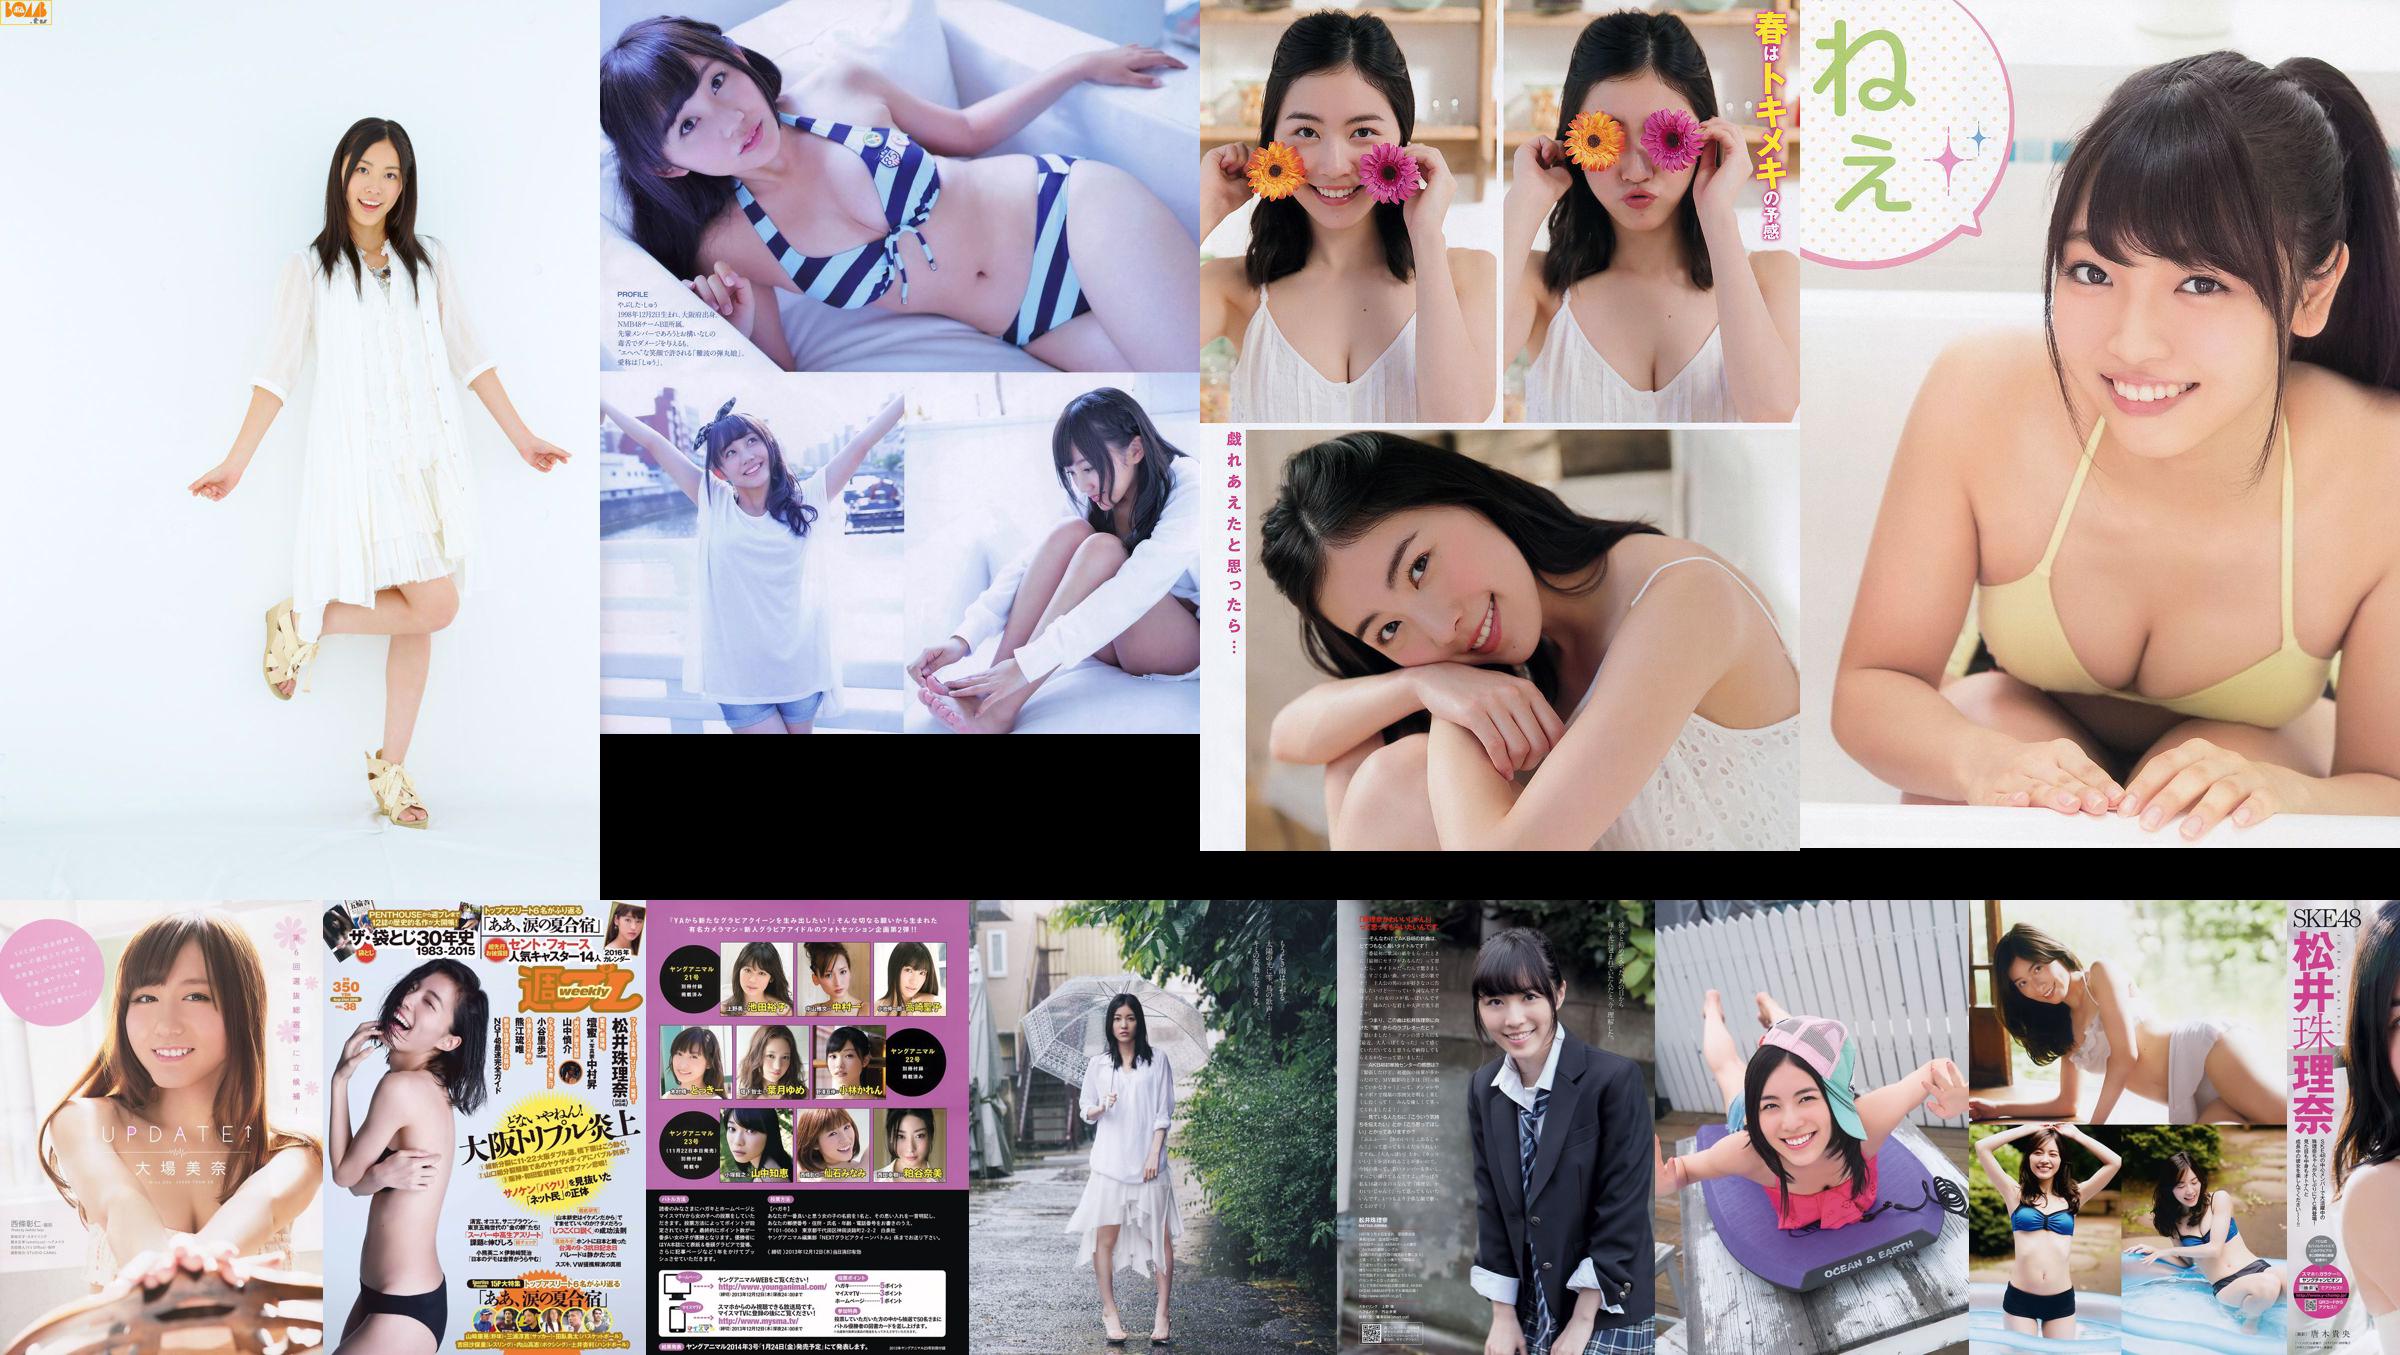 [Young Magazine] YM7 Jurina Matsui NMB48 2011 n ° 27 Photographie No.5d820f Page 2